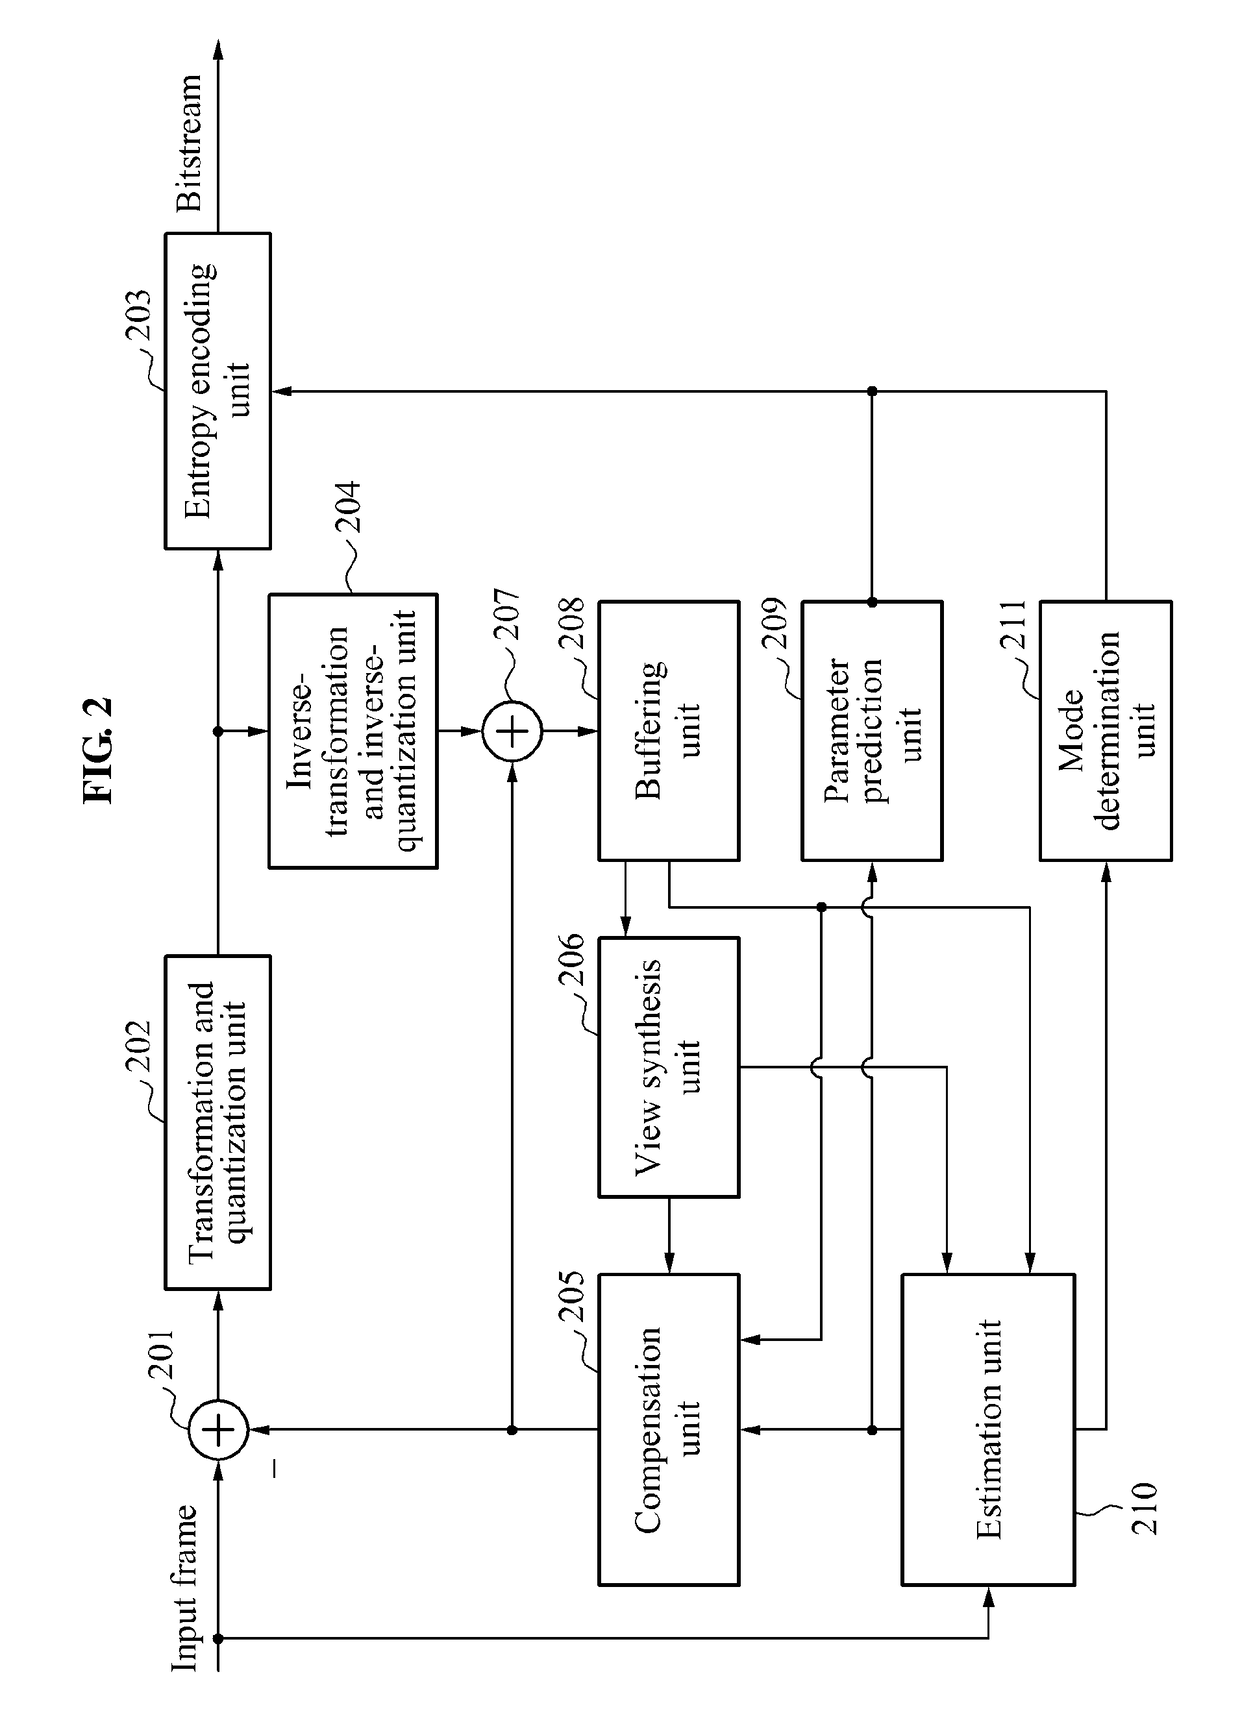 Method of encoding and decoding multiview video sequence based on adaptive compensation of local illumination mismatch in inter-frame prediction